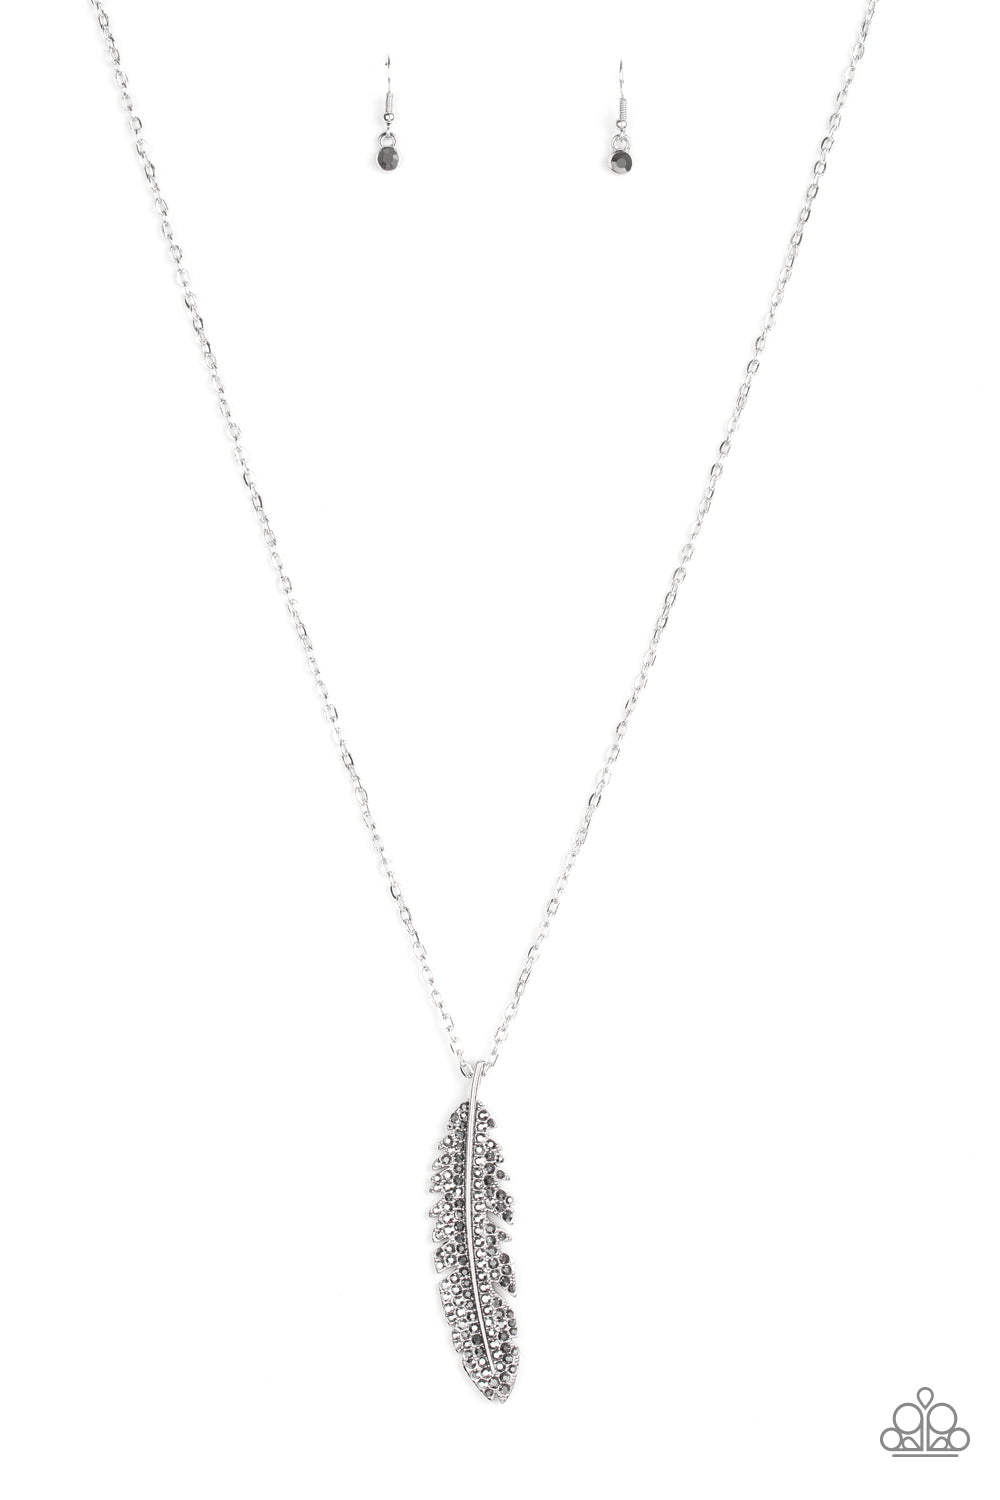 Paparazzi Soaring High Silver Feather Long Necklace